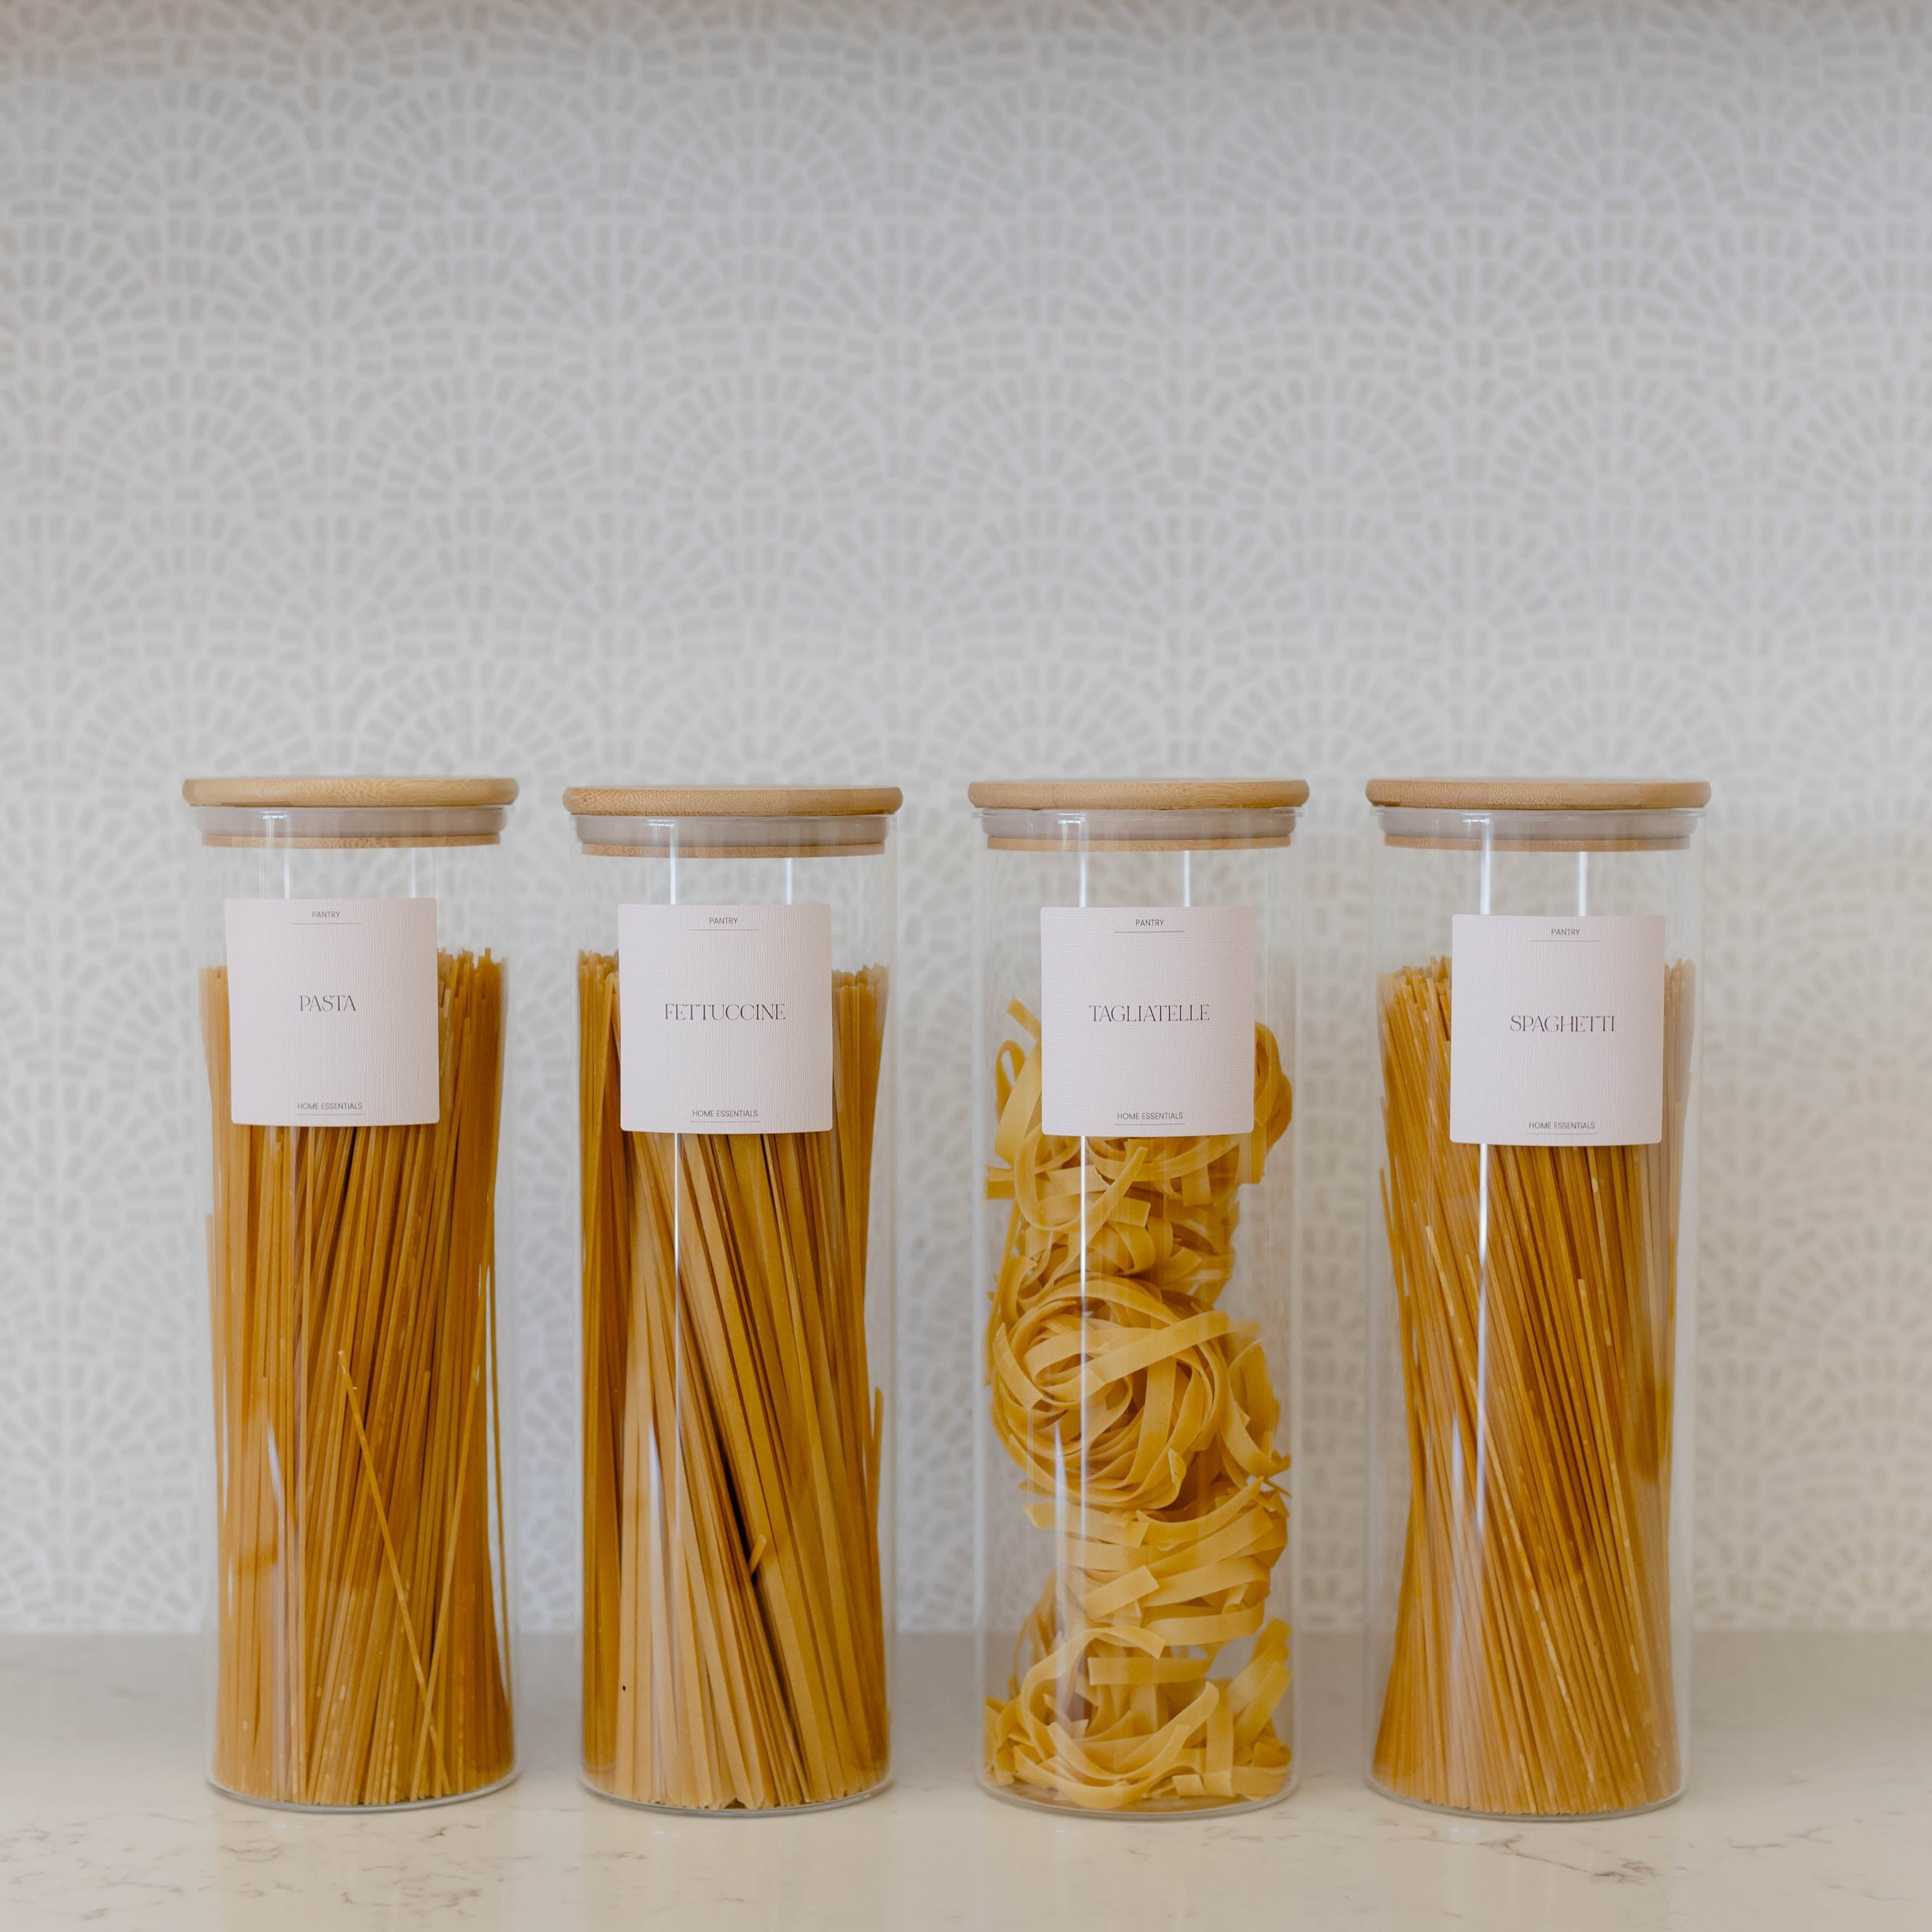 Stylish and functional 1.6L spaghetti jar by Pretty Little Designs, perfect for organizing long pasta varieties on a kitchen shelf.